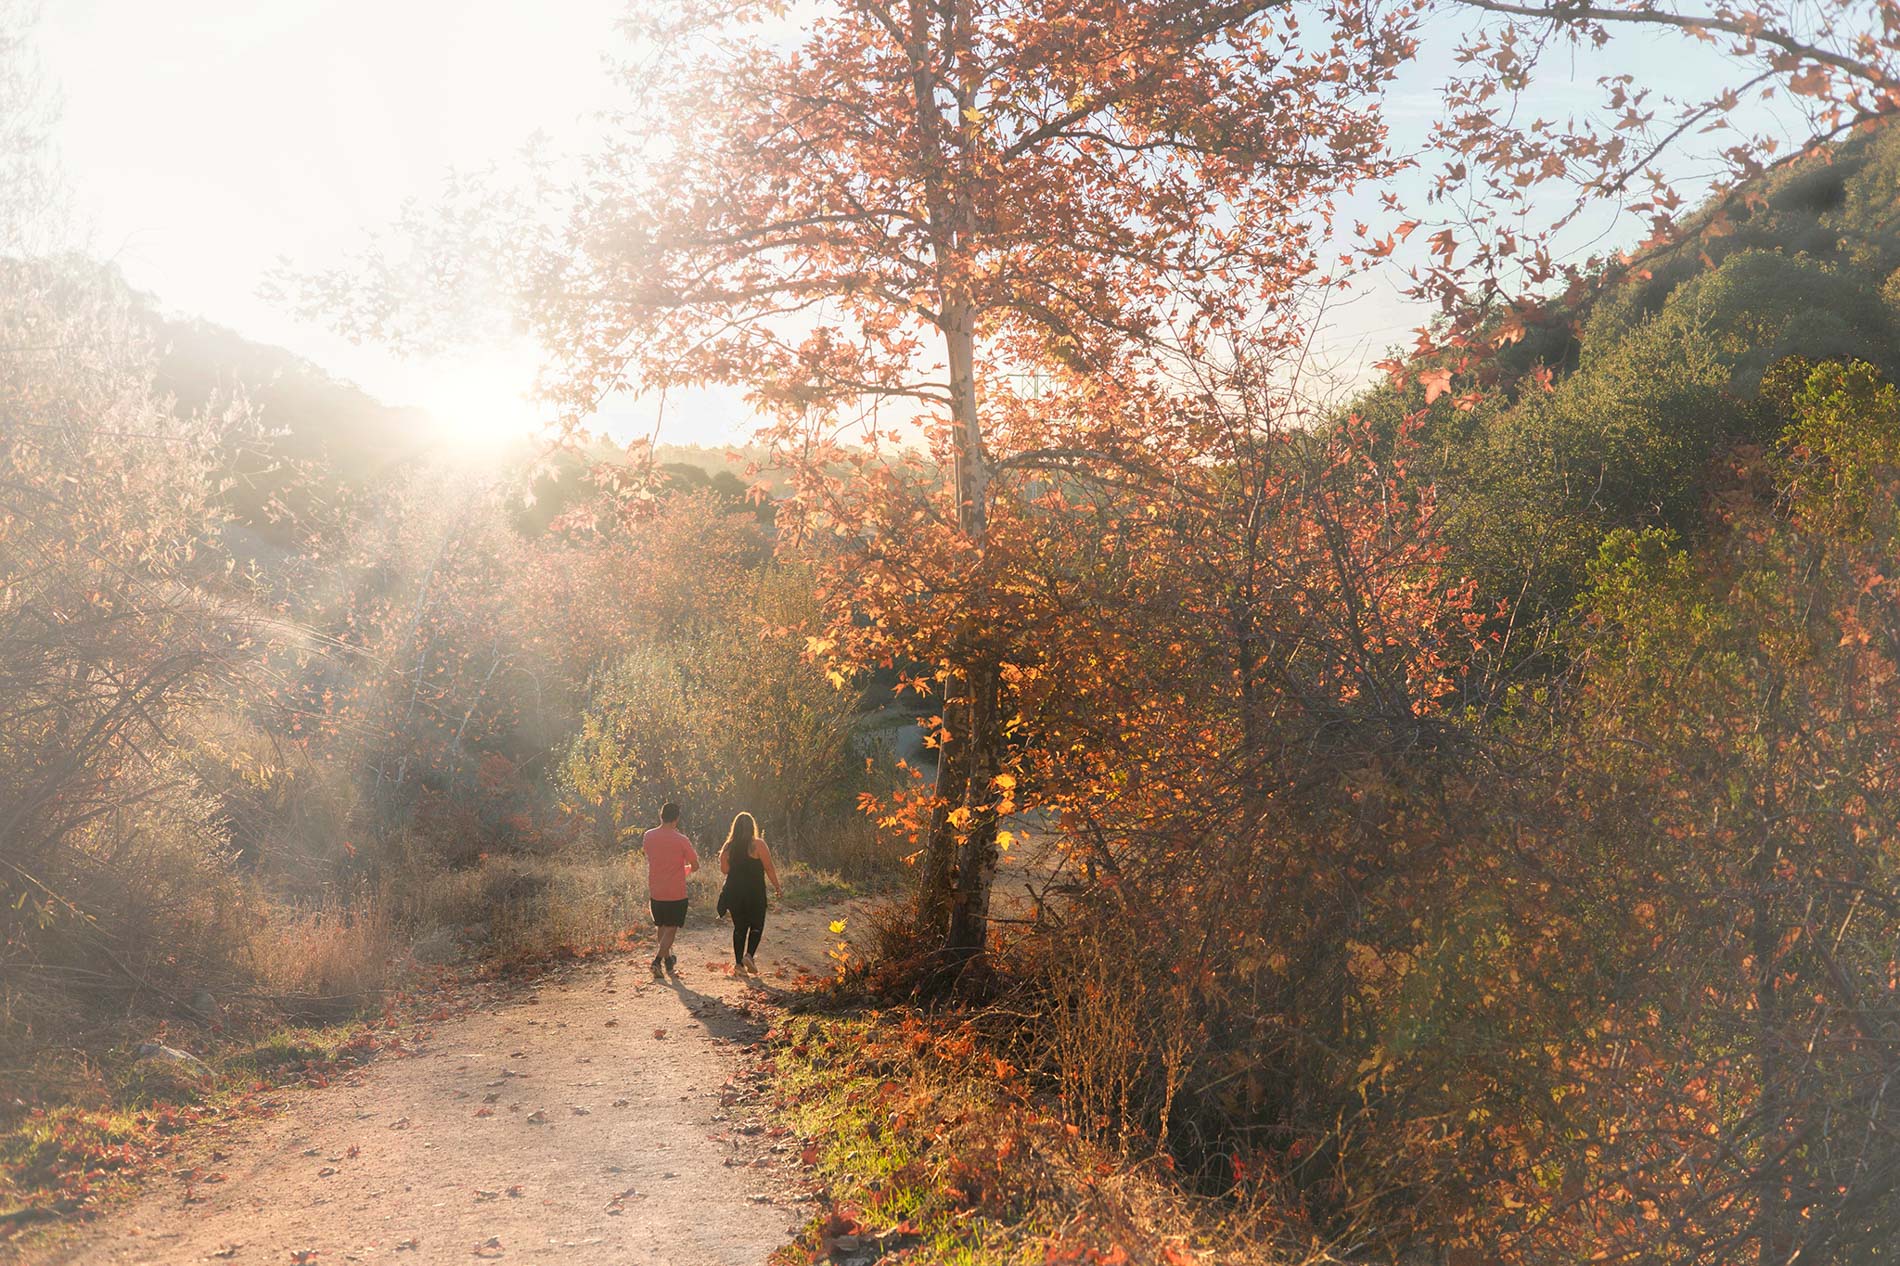 2 people walking on a trail under a warming sun